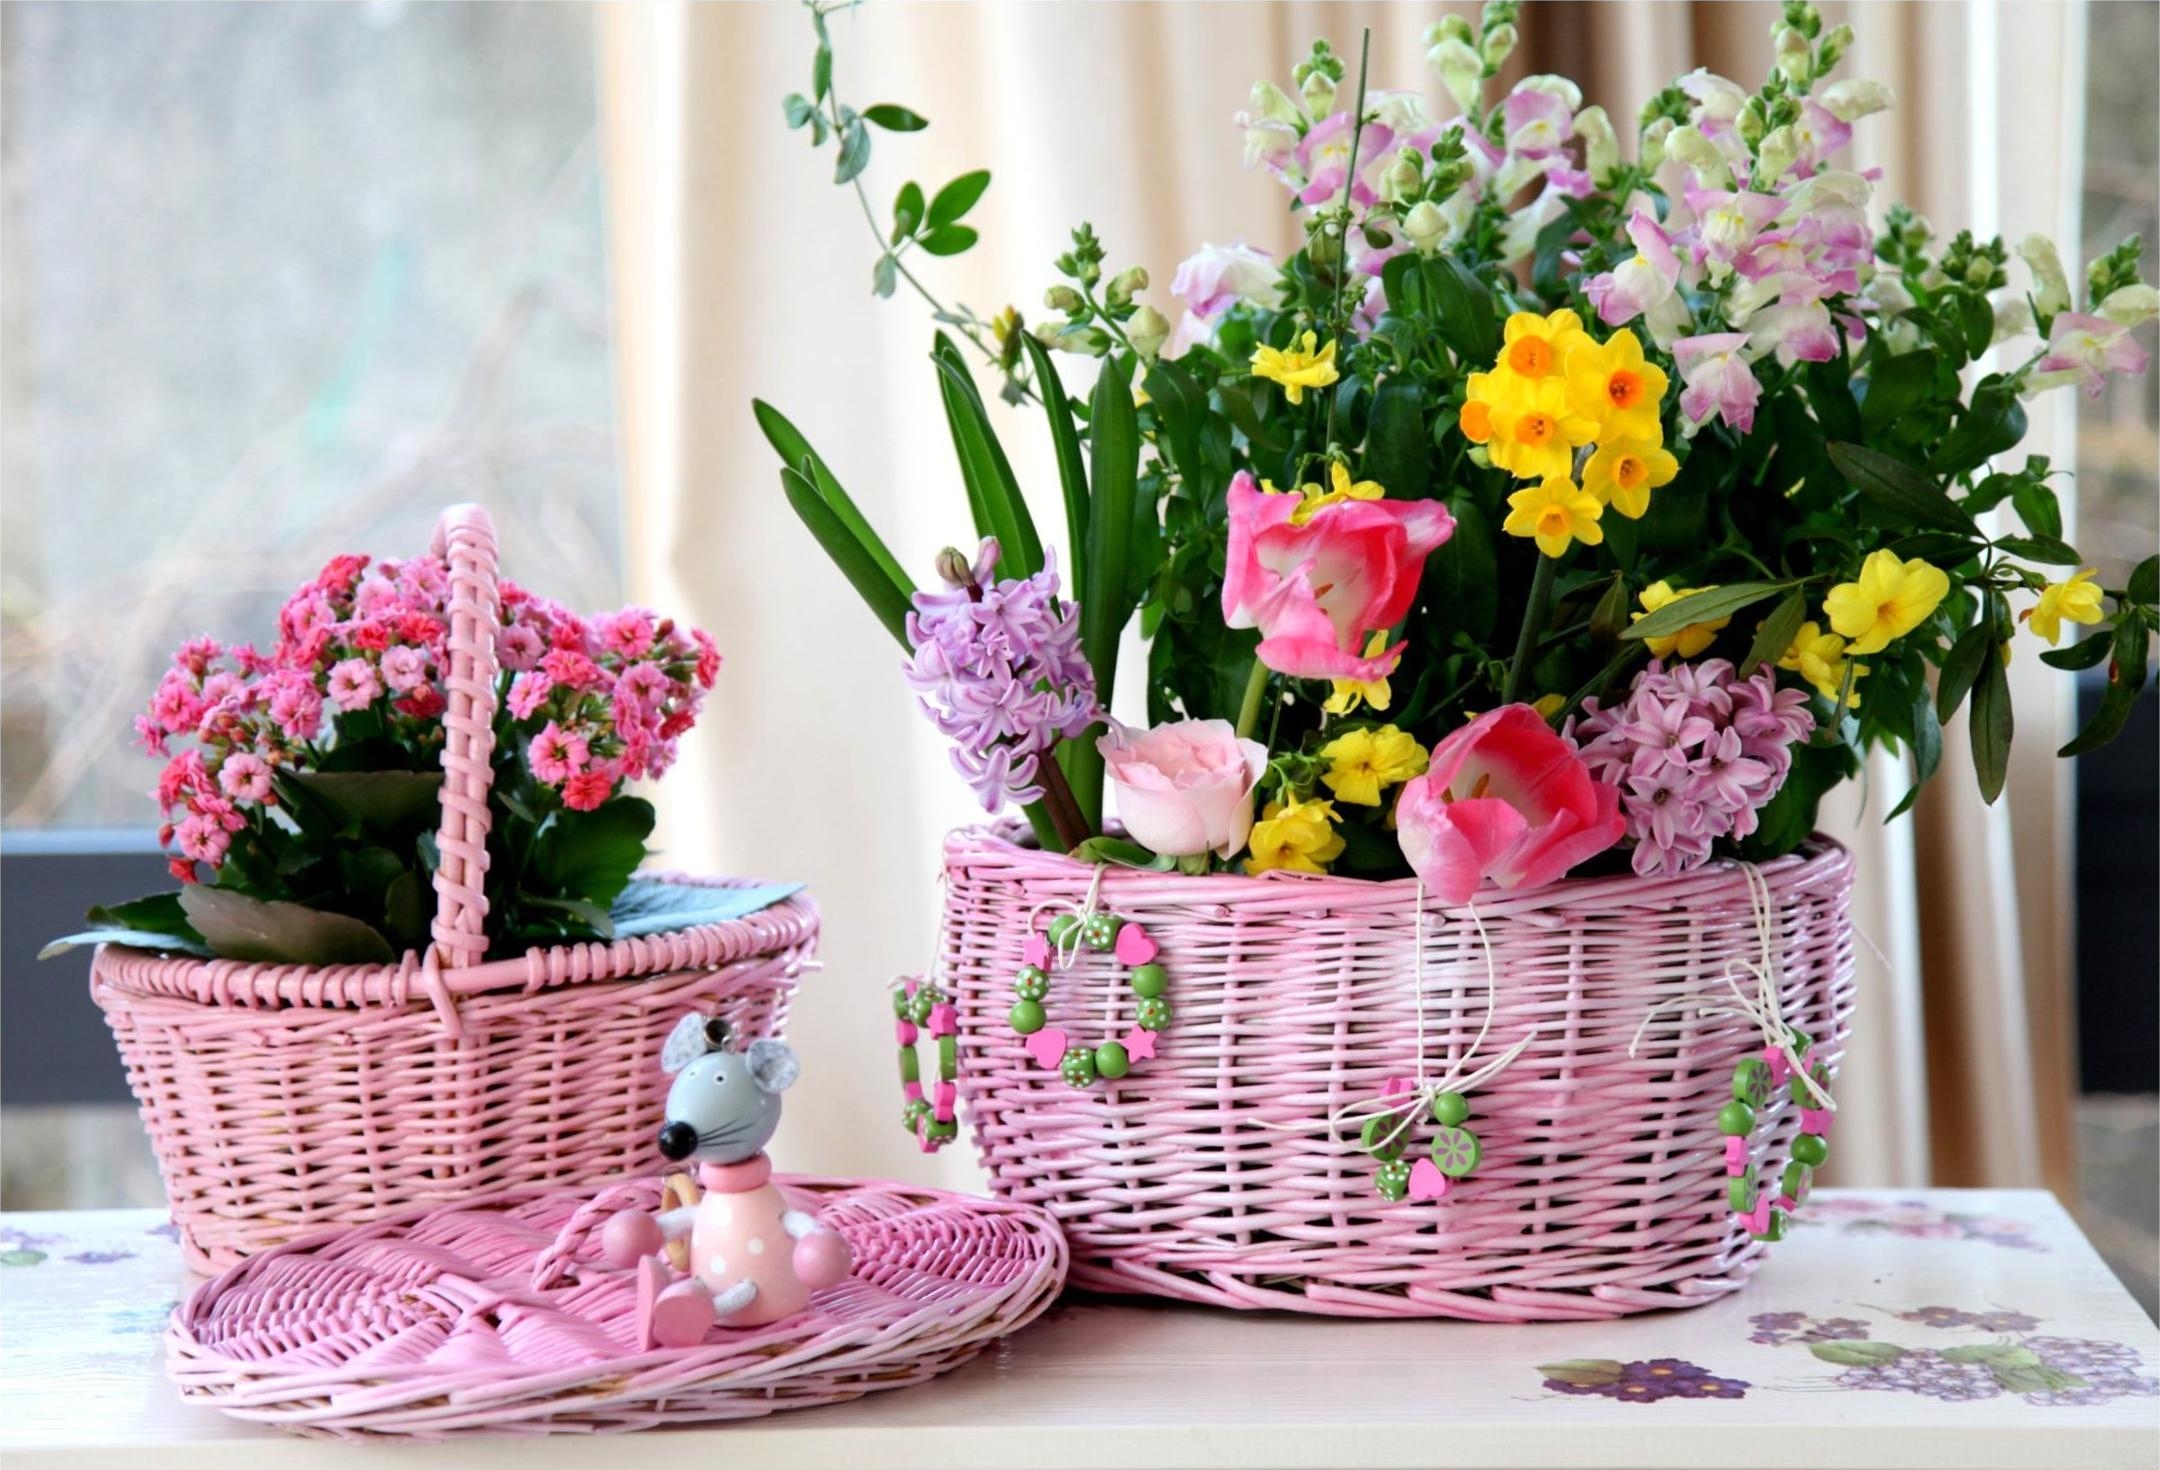 rose flower, flowers, tulips, narcissussi, rose, mouse, basket, hyacinths, baskets, freesia phone background